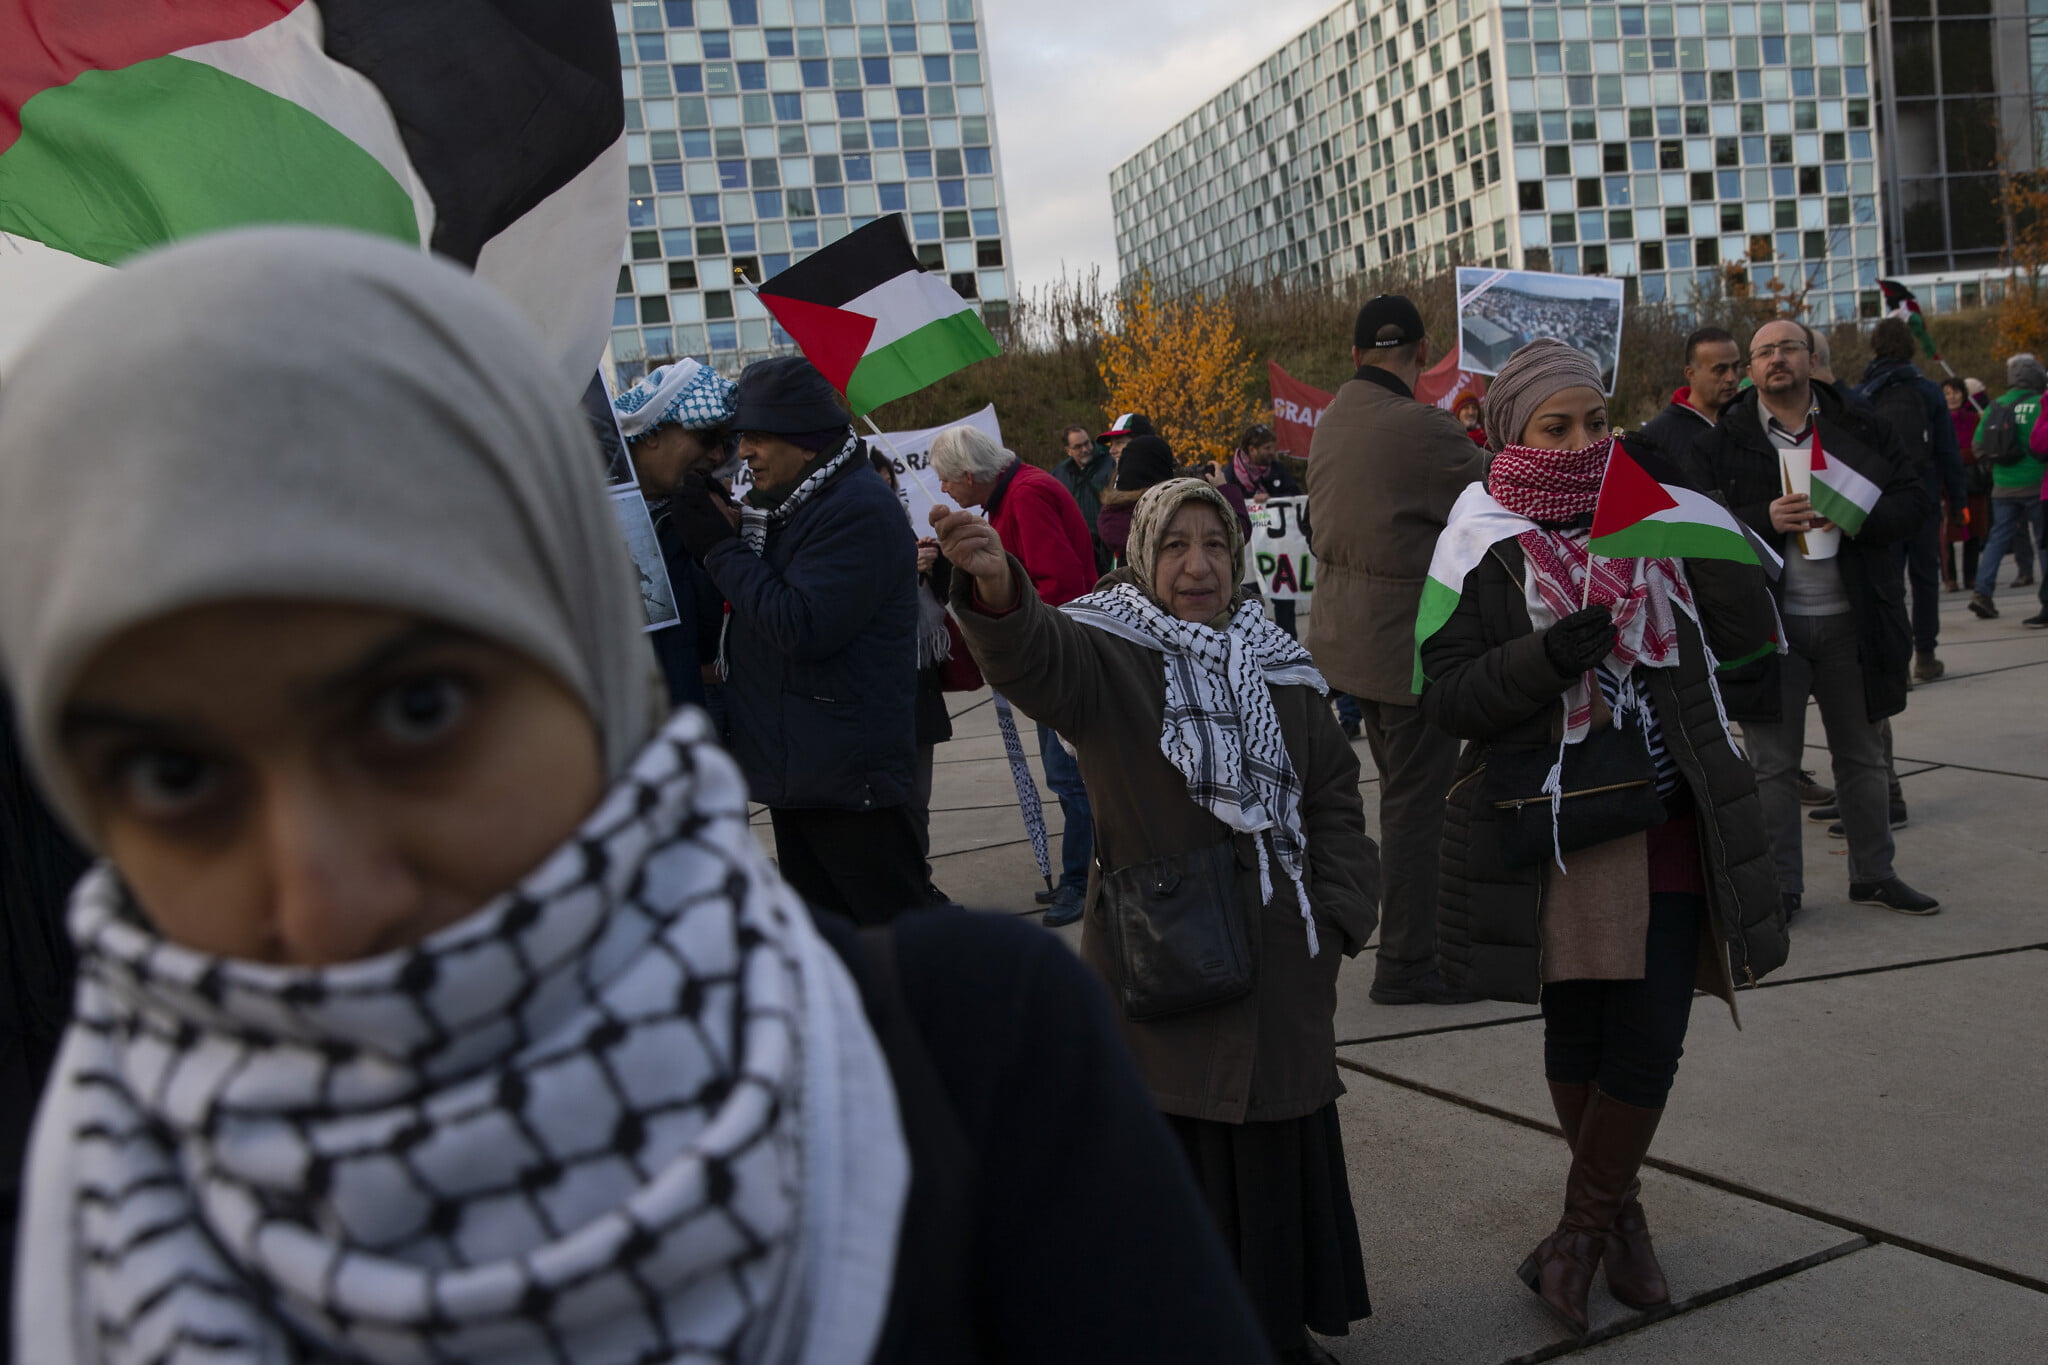 The Palestinian Question and the Role of the ICC